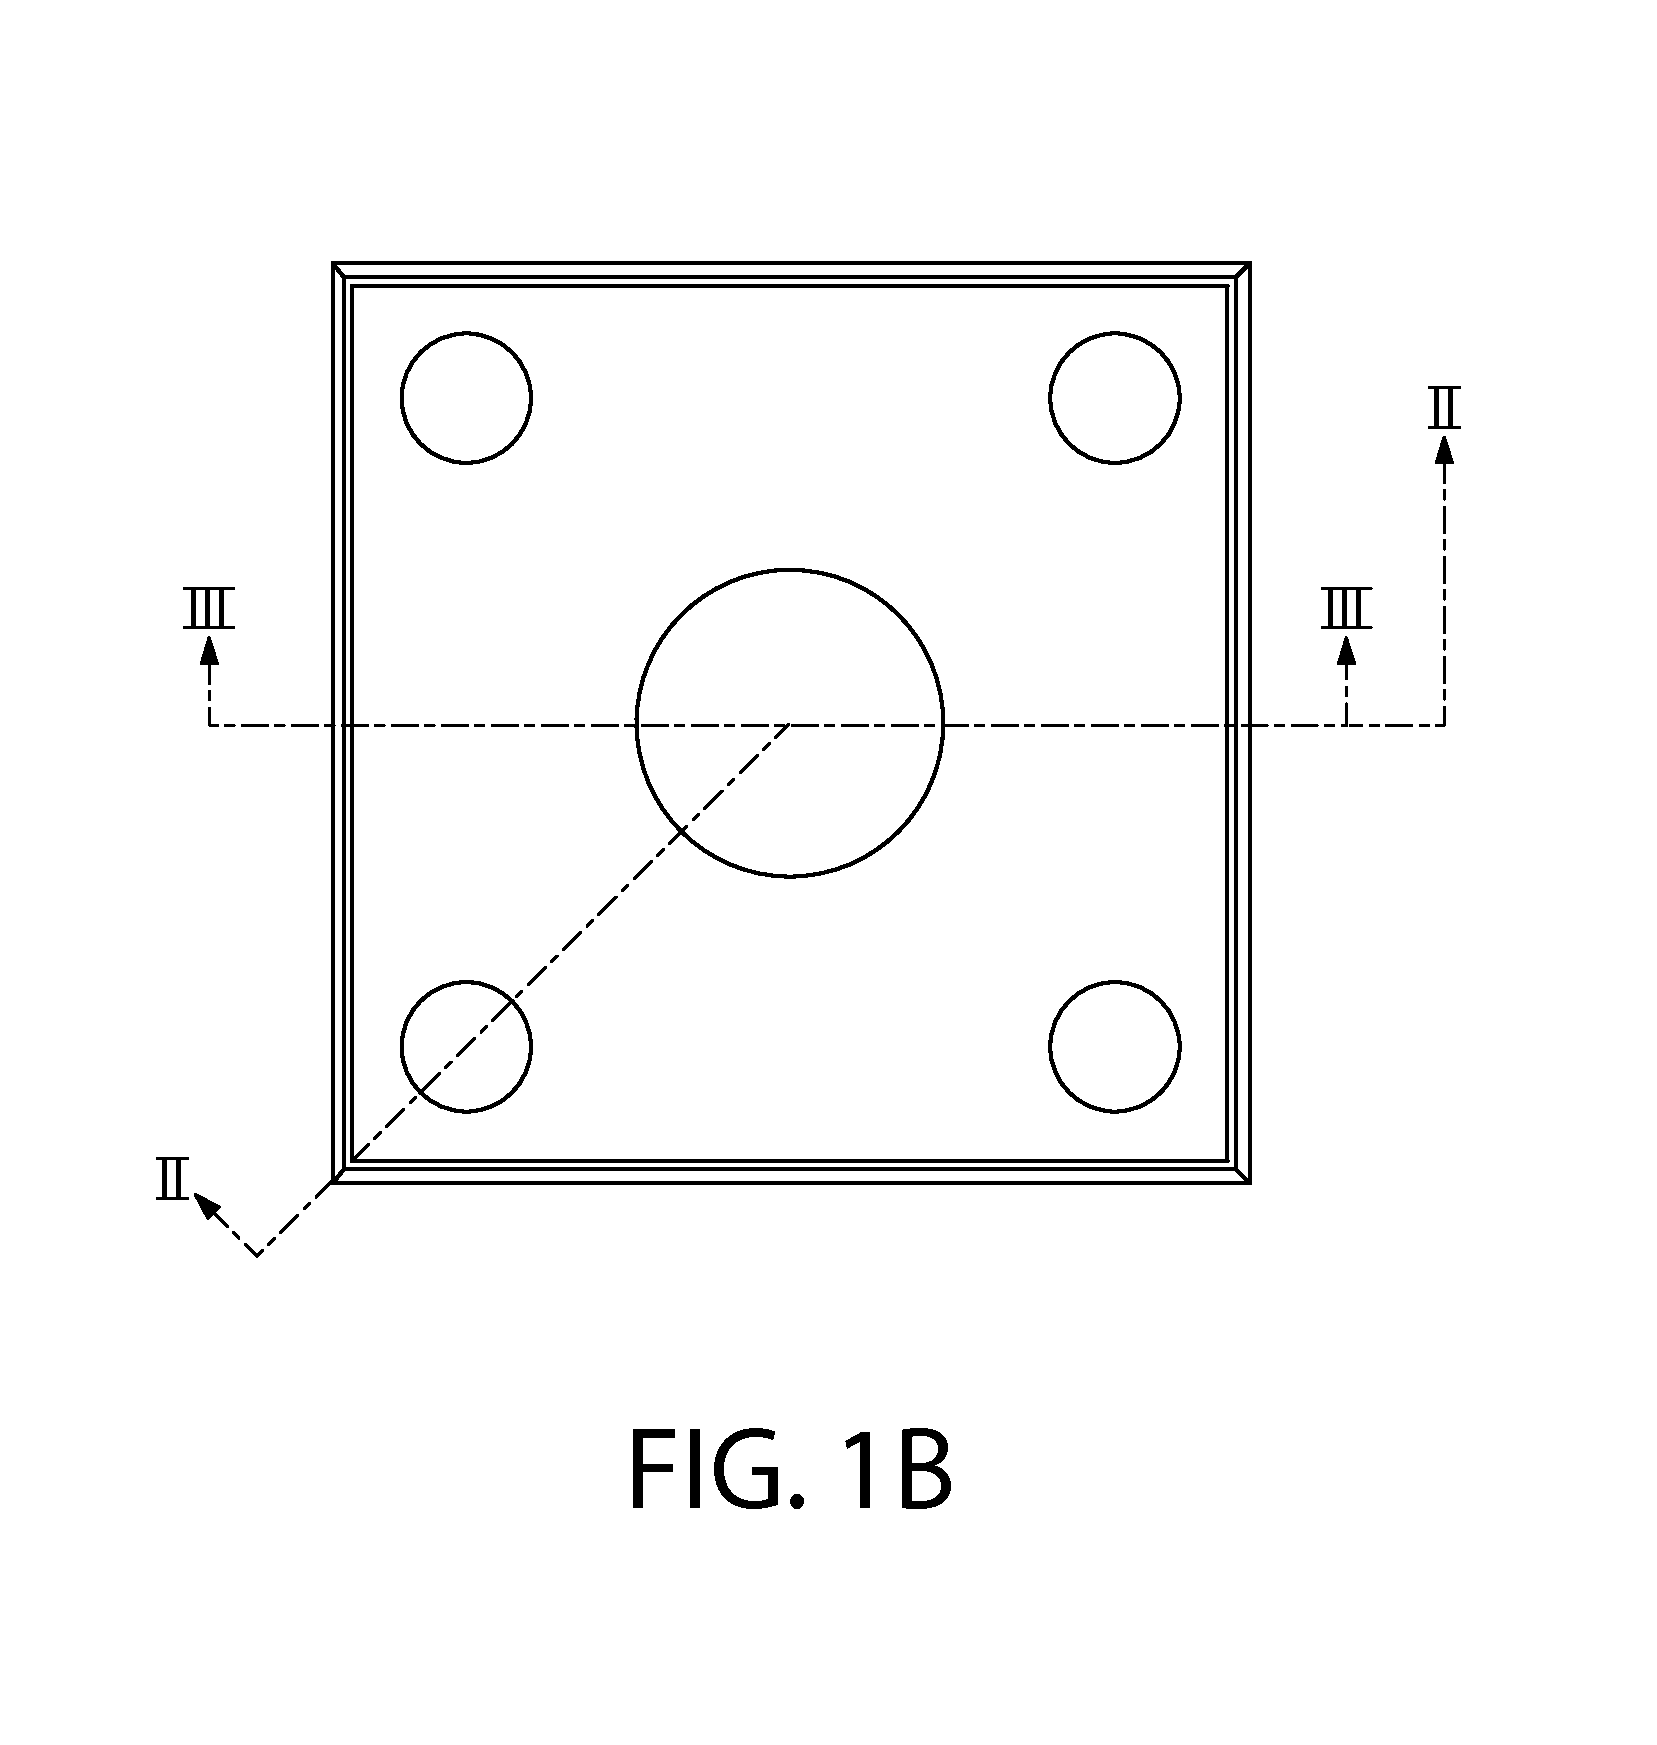 System and method of storing and/or transferring high level radioactive waste